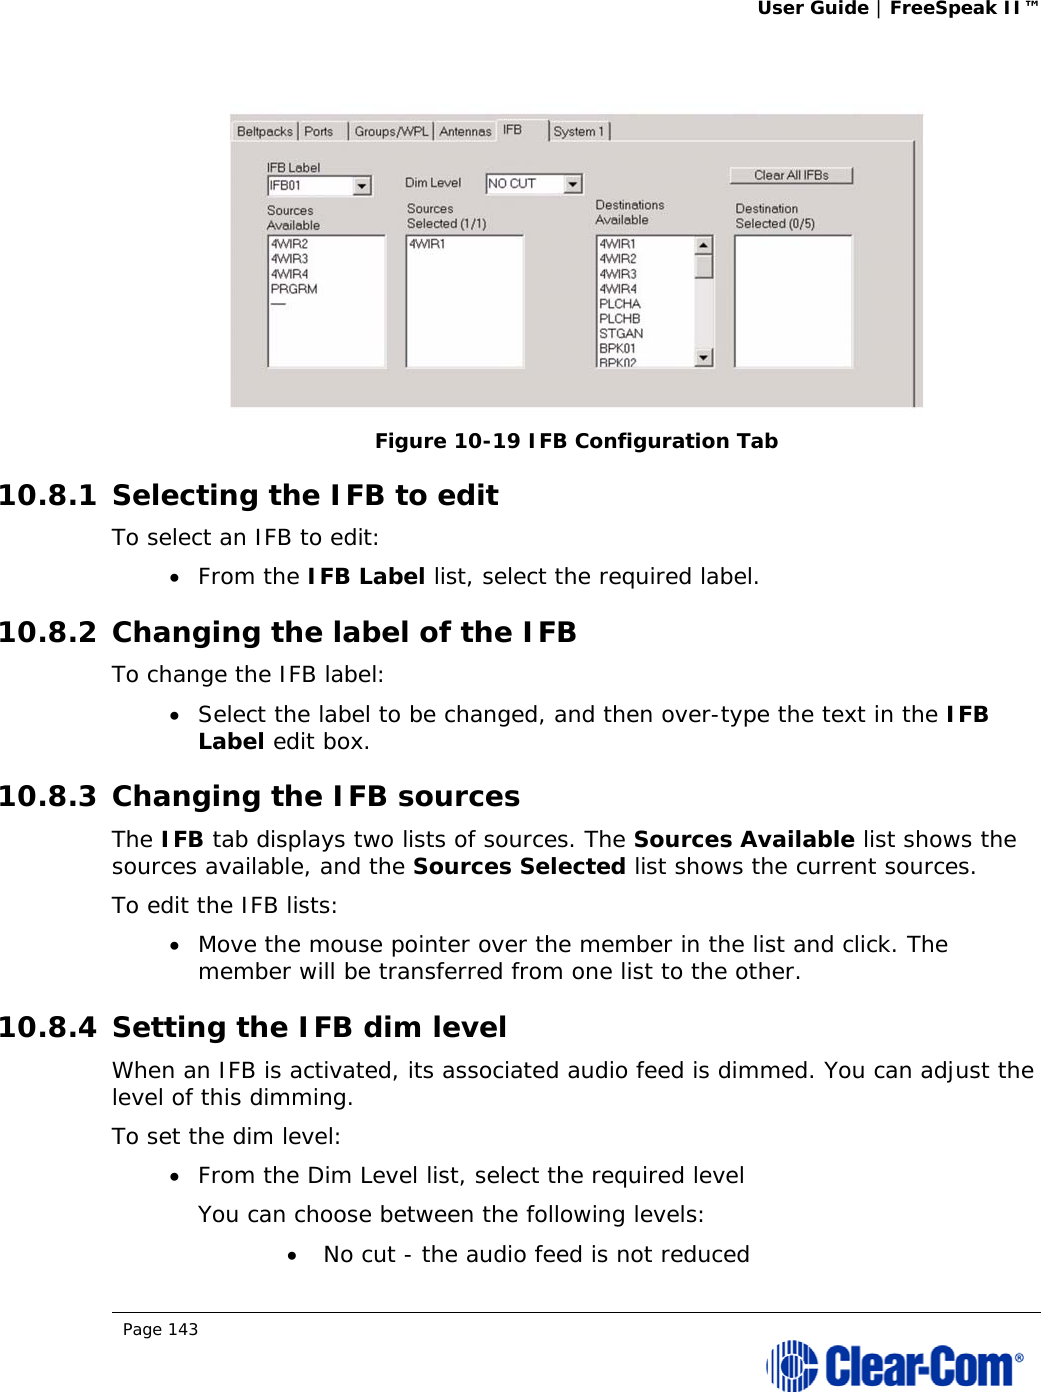 User Guide | FreeSpeak II™  Page 143    Figure 10-19 IFB Configuration Tab 10.8.1 Selecting the IFB to edit To select an IFB to edit:  From the IFB Label list, select the required label. 10.8.2 Changing the label of the IFB To change the IFB label:  Select the label to be changed, and then over-type the text in the IFB Label edit box. 10.8.3 Changing the IFB sources The IFB tab displays two lists of sources. The Sources Available list shows the sources available, and the Sources Selected list shows the current sources. To edit the IFB lists:  Move the mouse pointer over the member in the list and click. The member will be transferred from one list to the other. 10.8.4 Setting the IFB dim level When an IFB is activated, its associated audio feed is dimmed. You can adjust the level of this dimming. To set the dim level:  From the Dim Level list, select the required level You can choose between the following levels:  No cut - the audio feed is not reduced 